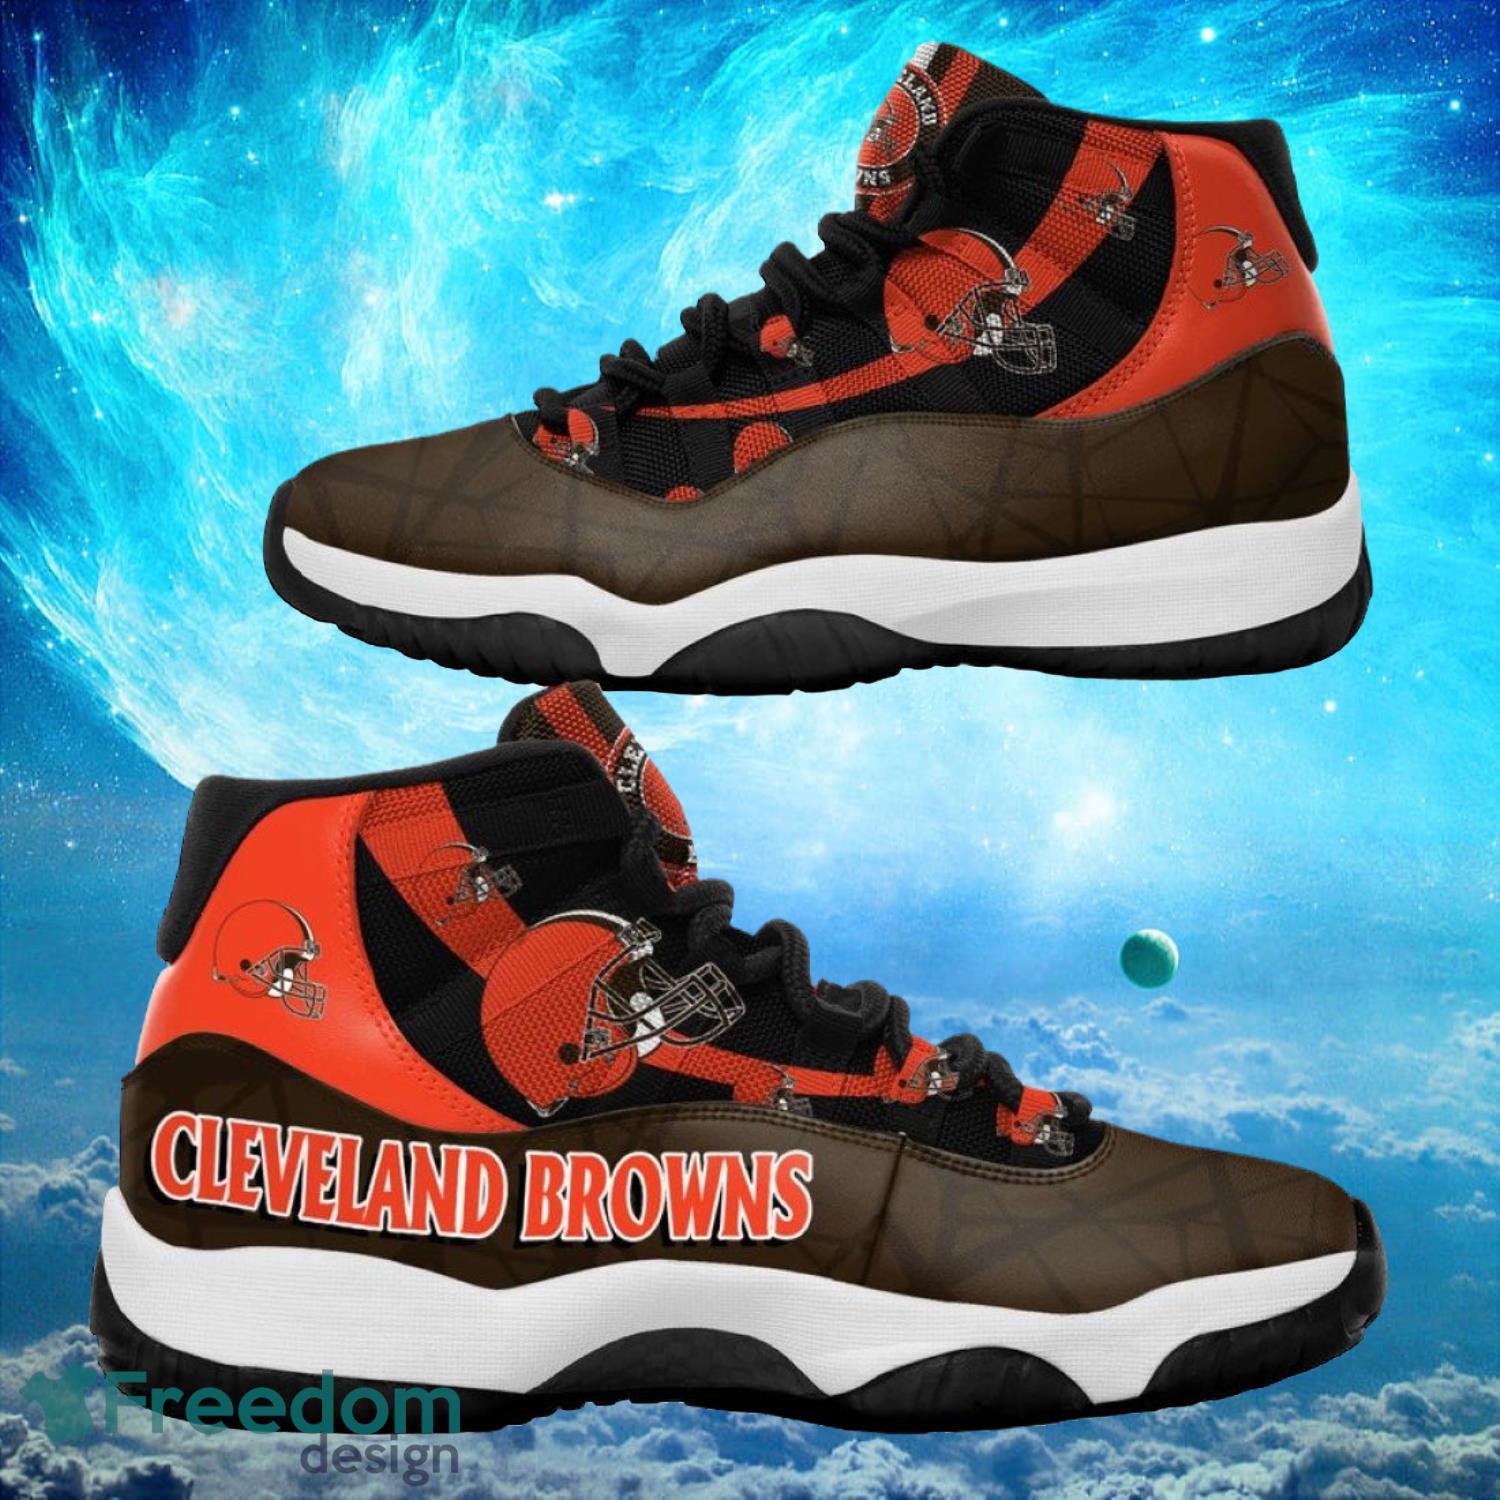 Cleveland Browns NFL Air Jordan 11 Sneakers Shoes Gift For Fans Product Photo 1